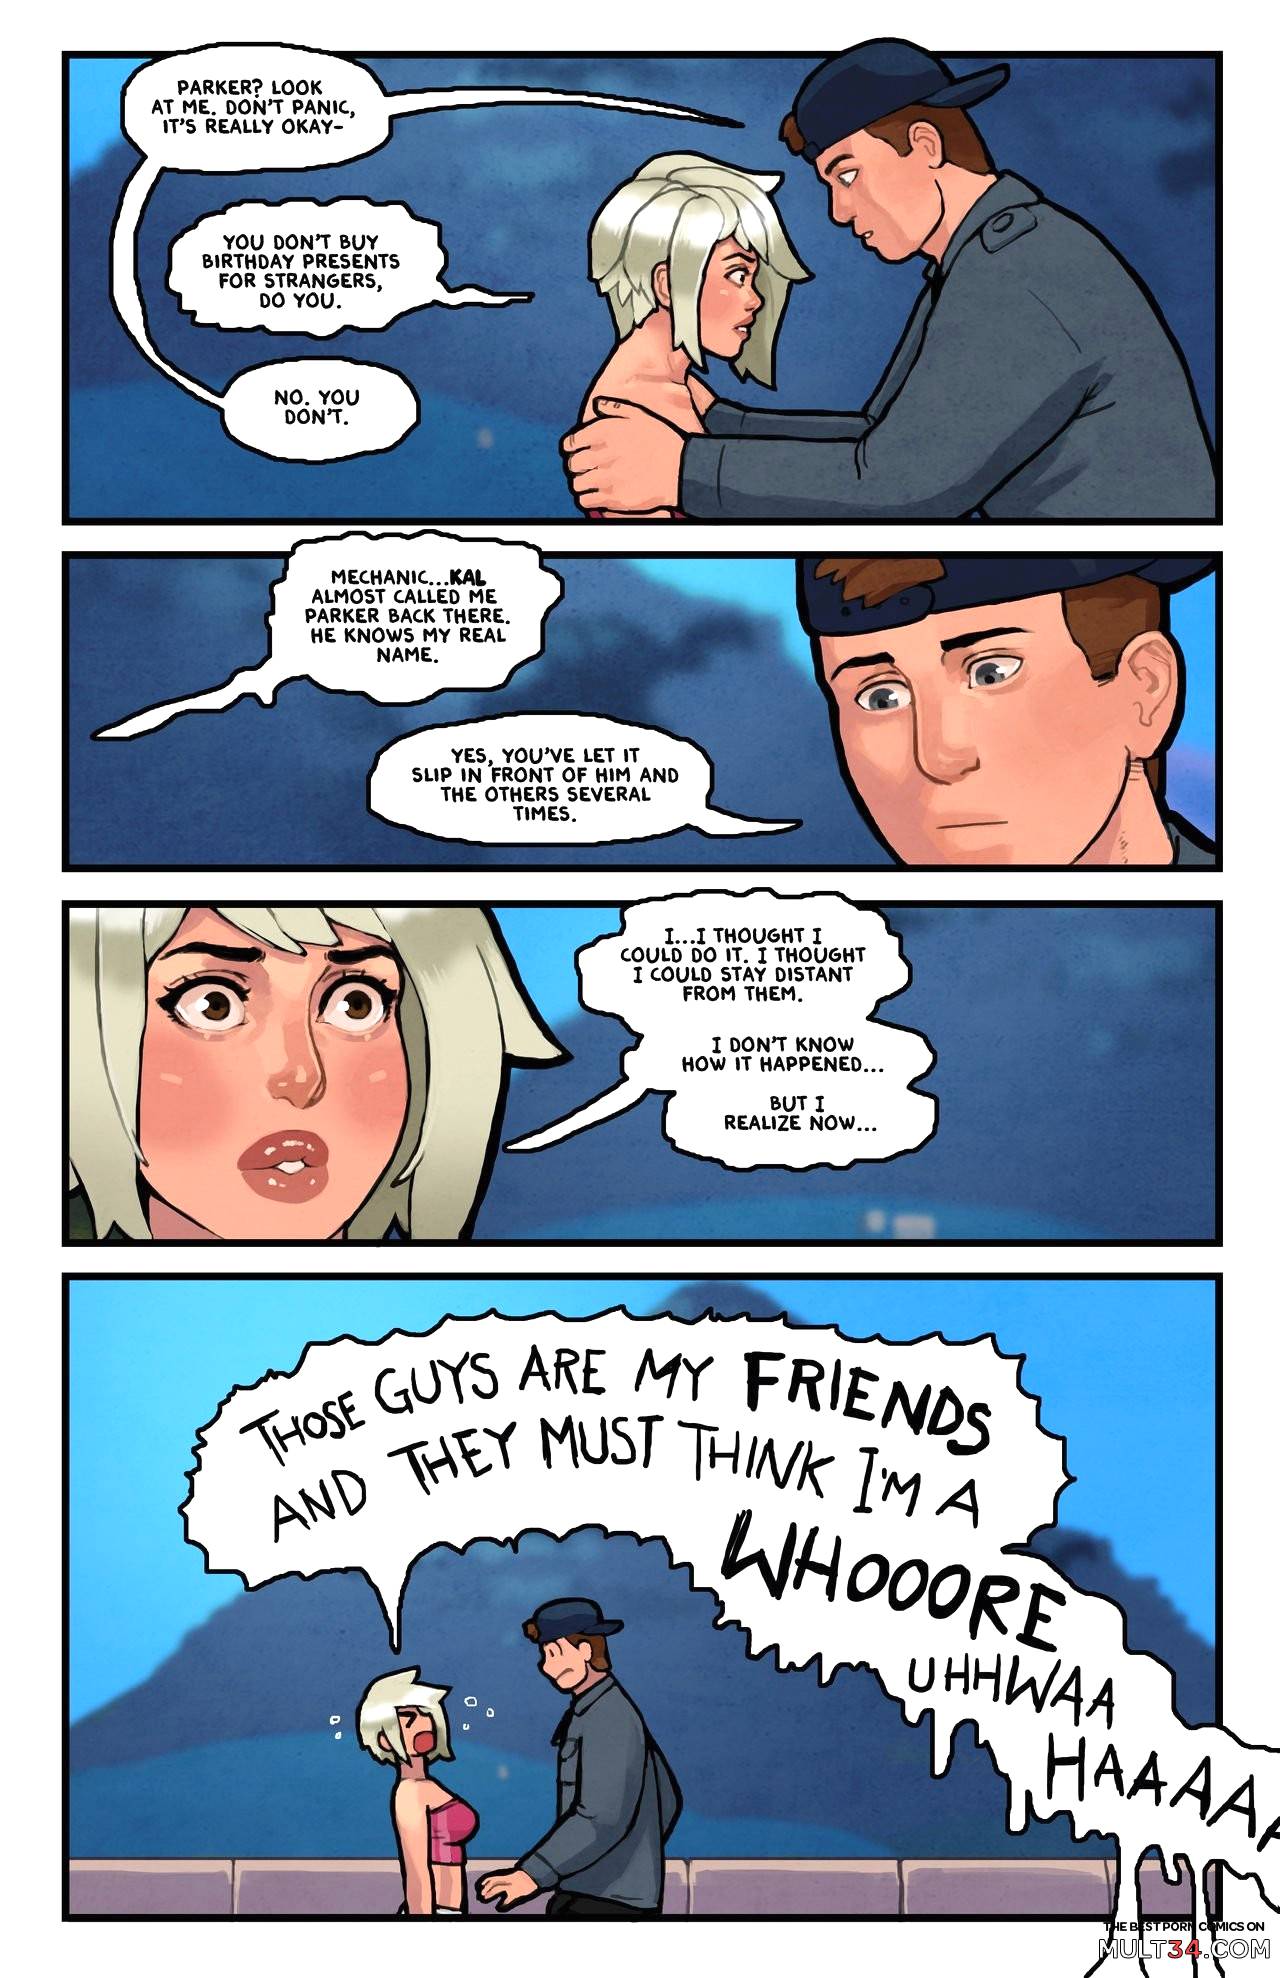 This Romantic World 6 page 11